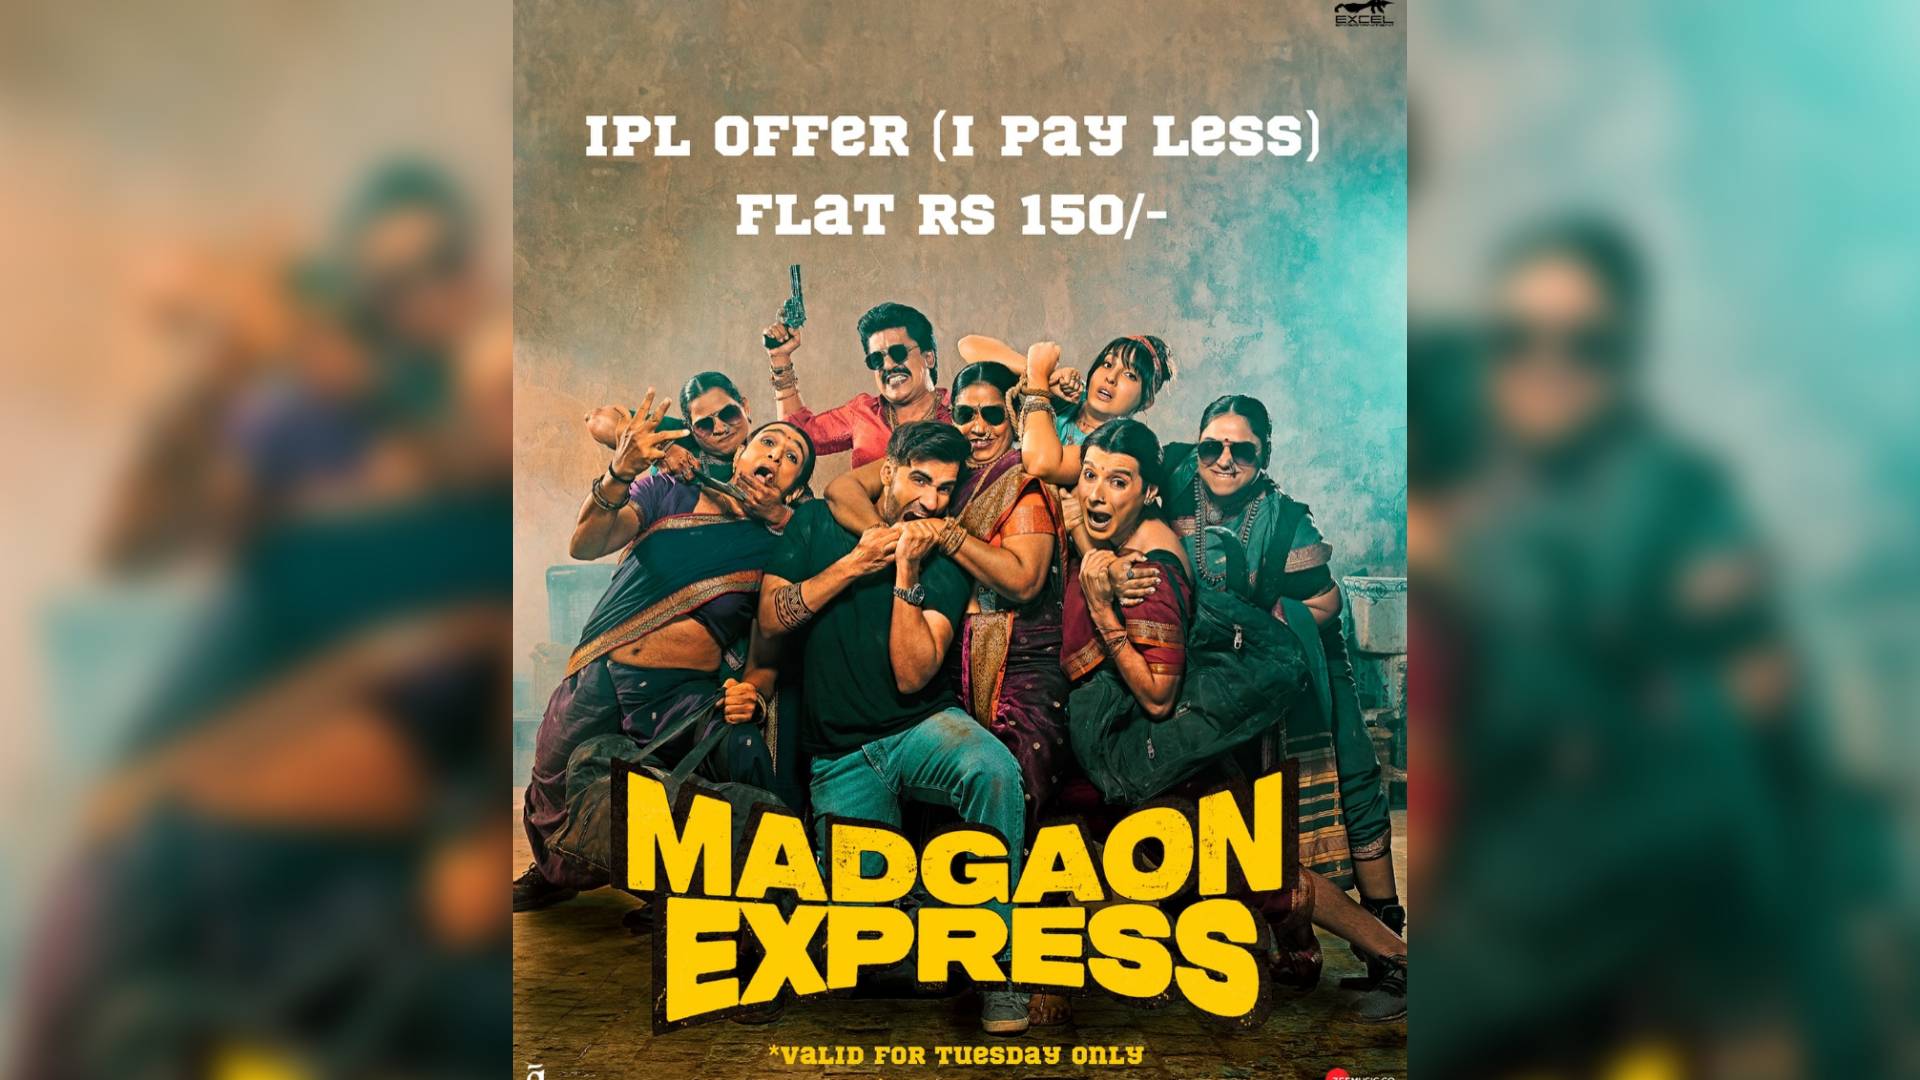 Special offer opens! Today, watch Excel Entertainment’s Madgaon Express at Rs. 150 with the special IPL offer ‘I. Pay. Less’!